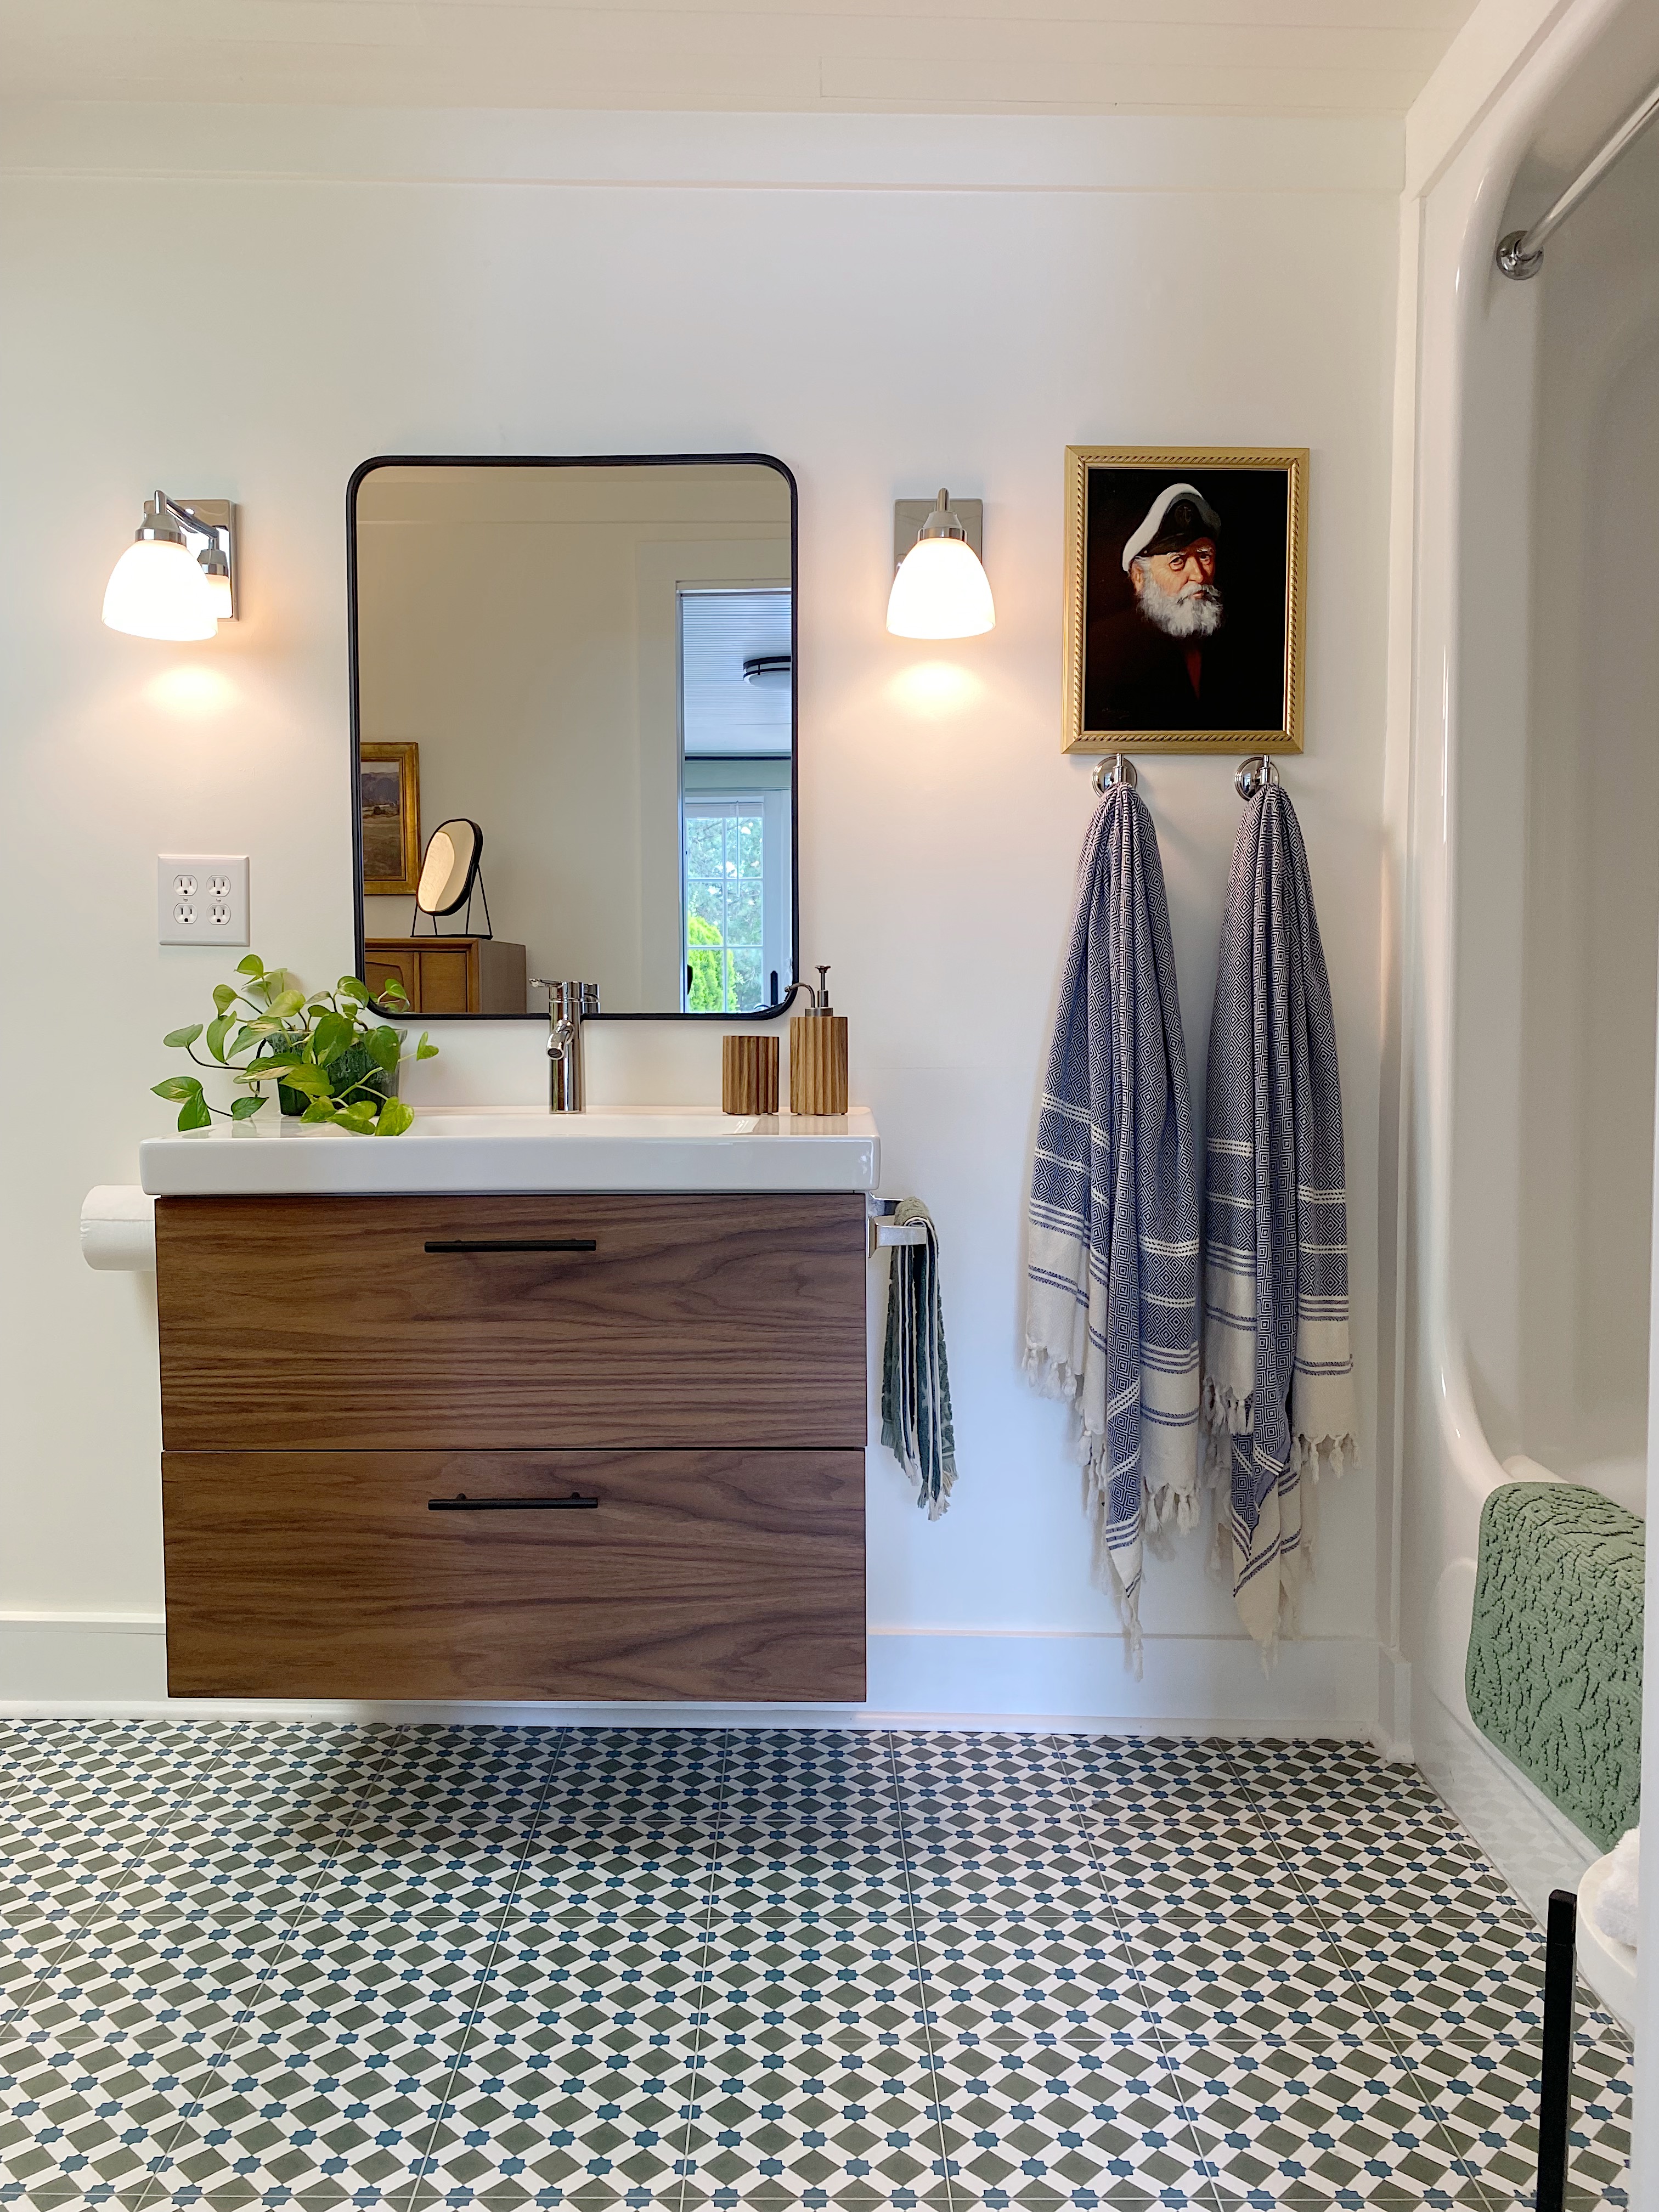 white bathroom with Ikea vanity with wood drawer fronts and black framed mirror and patterned floor tile